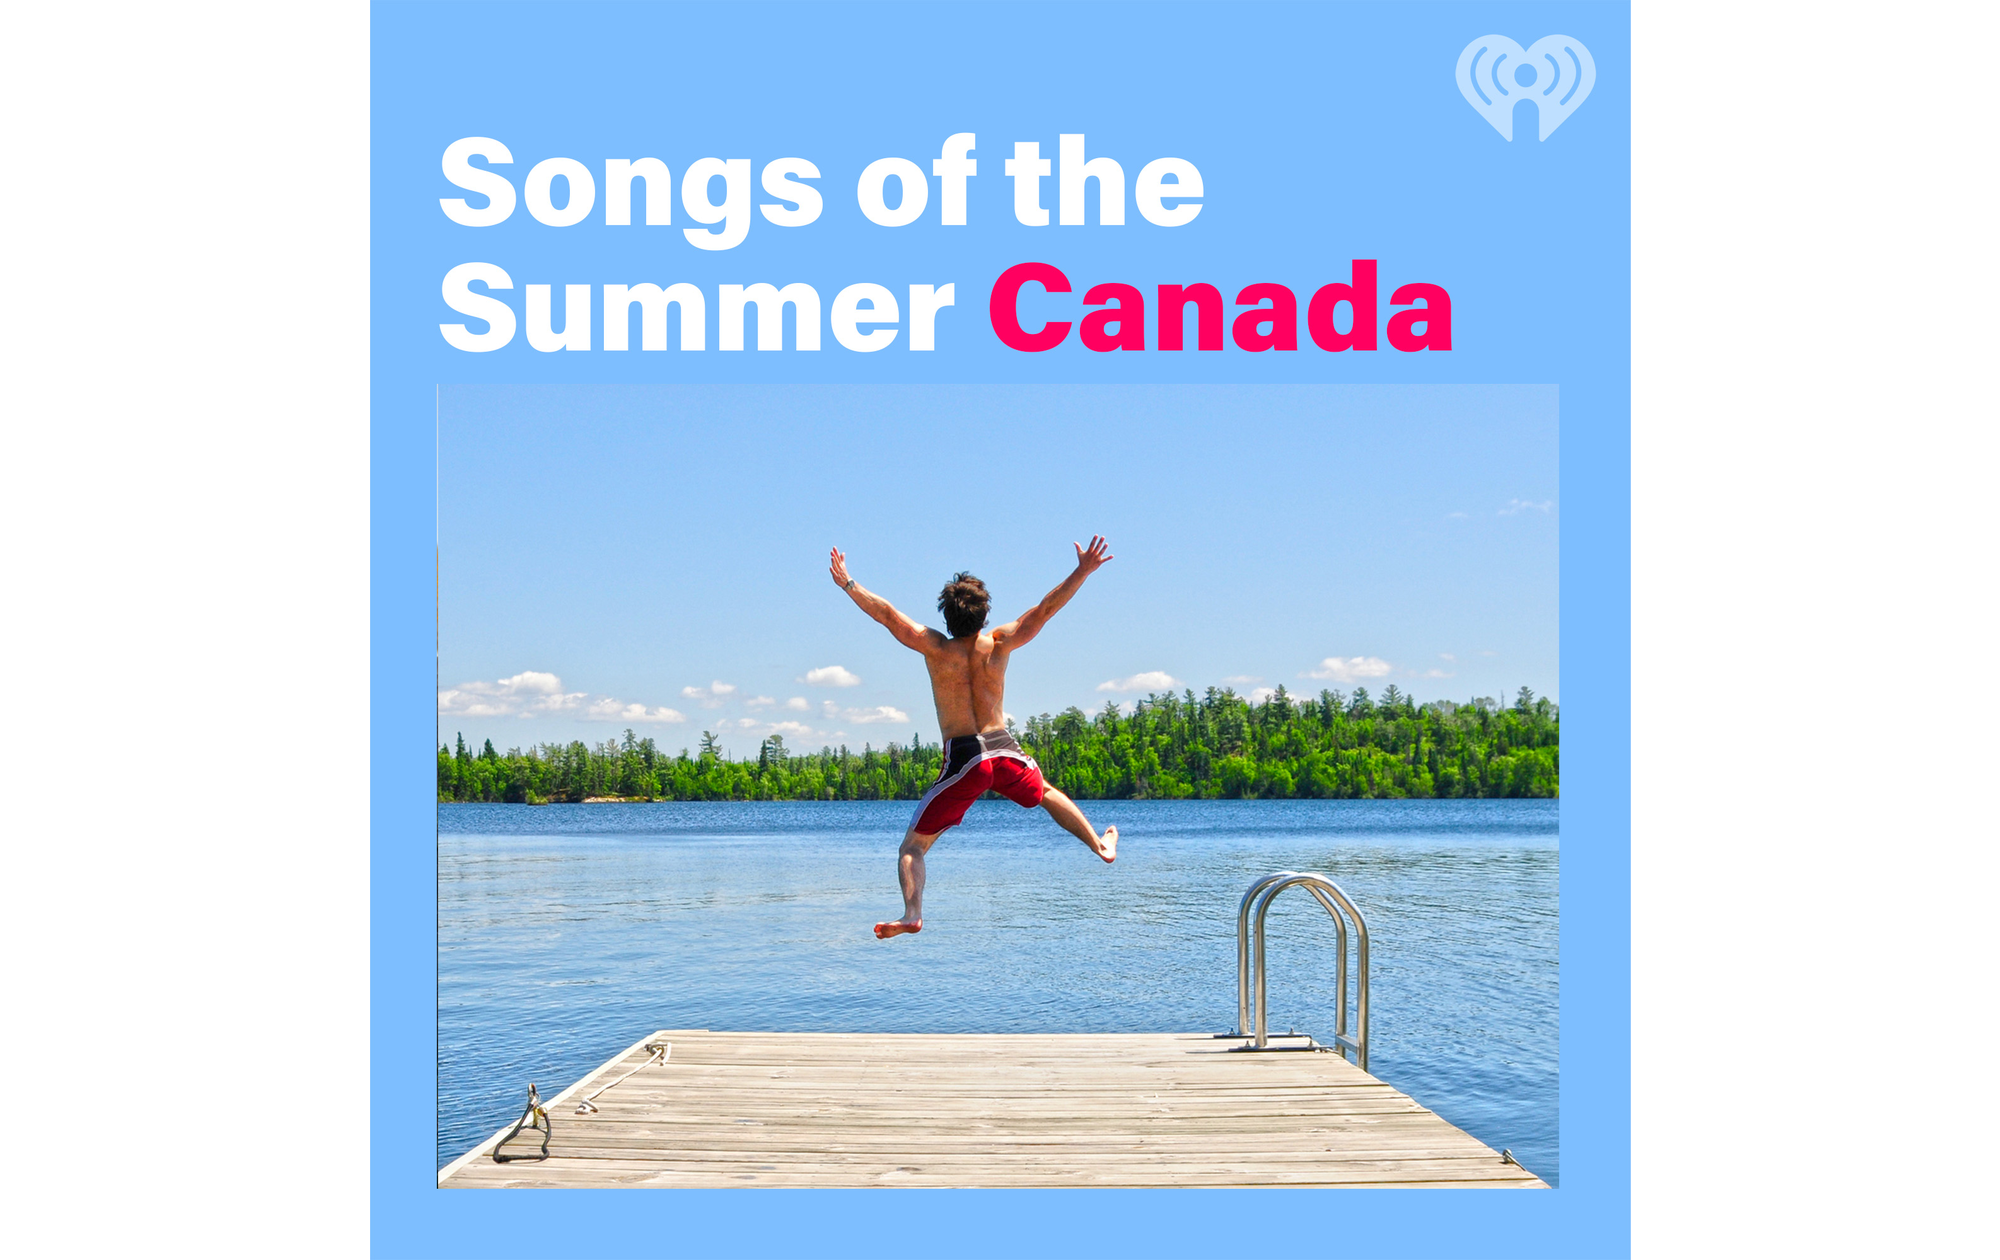 Songs of the Summer Canada iHeart